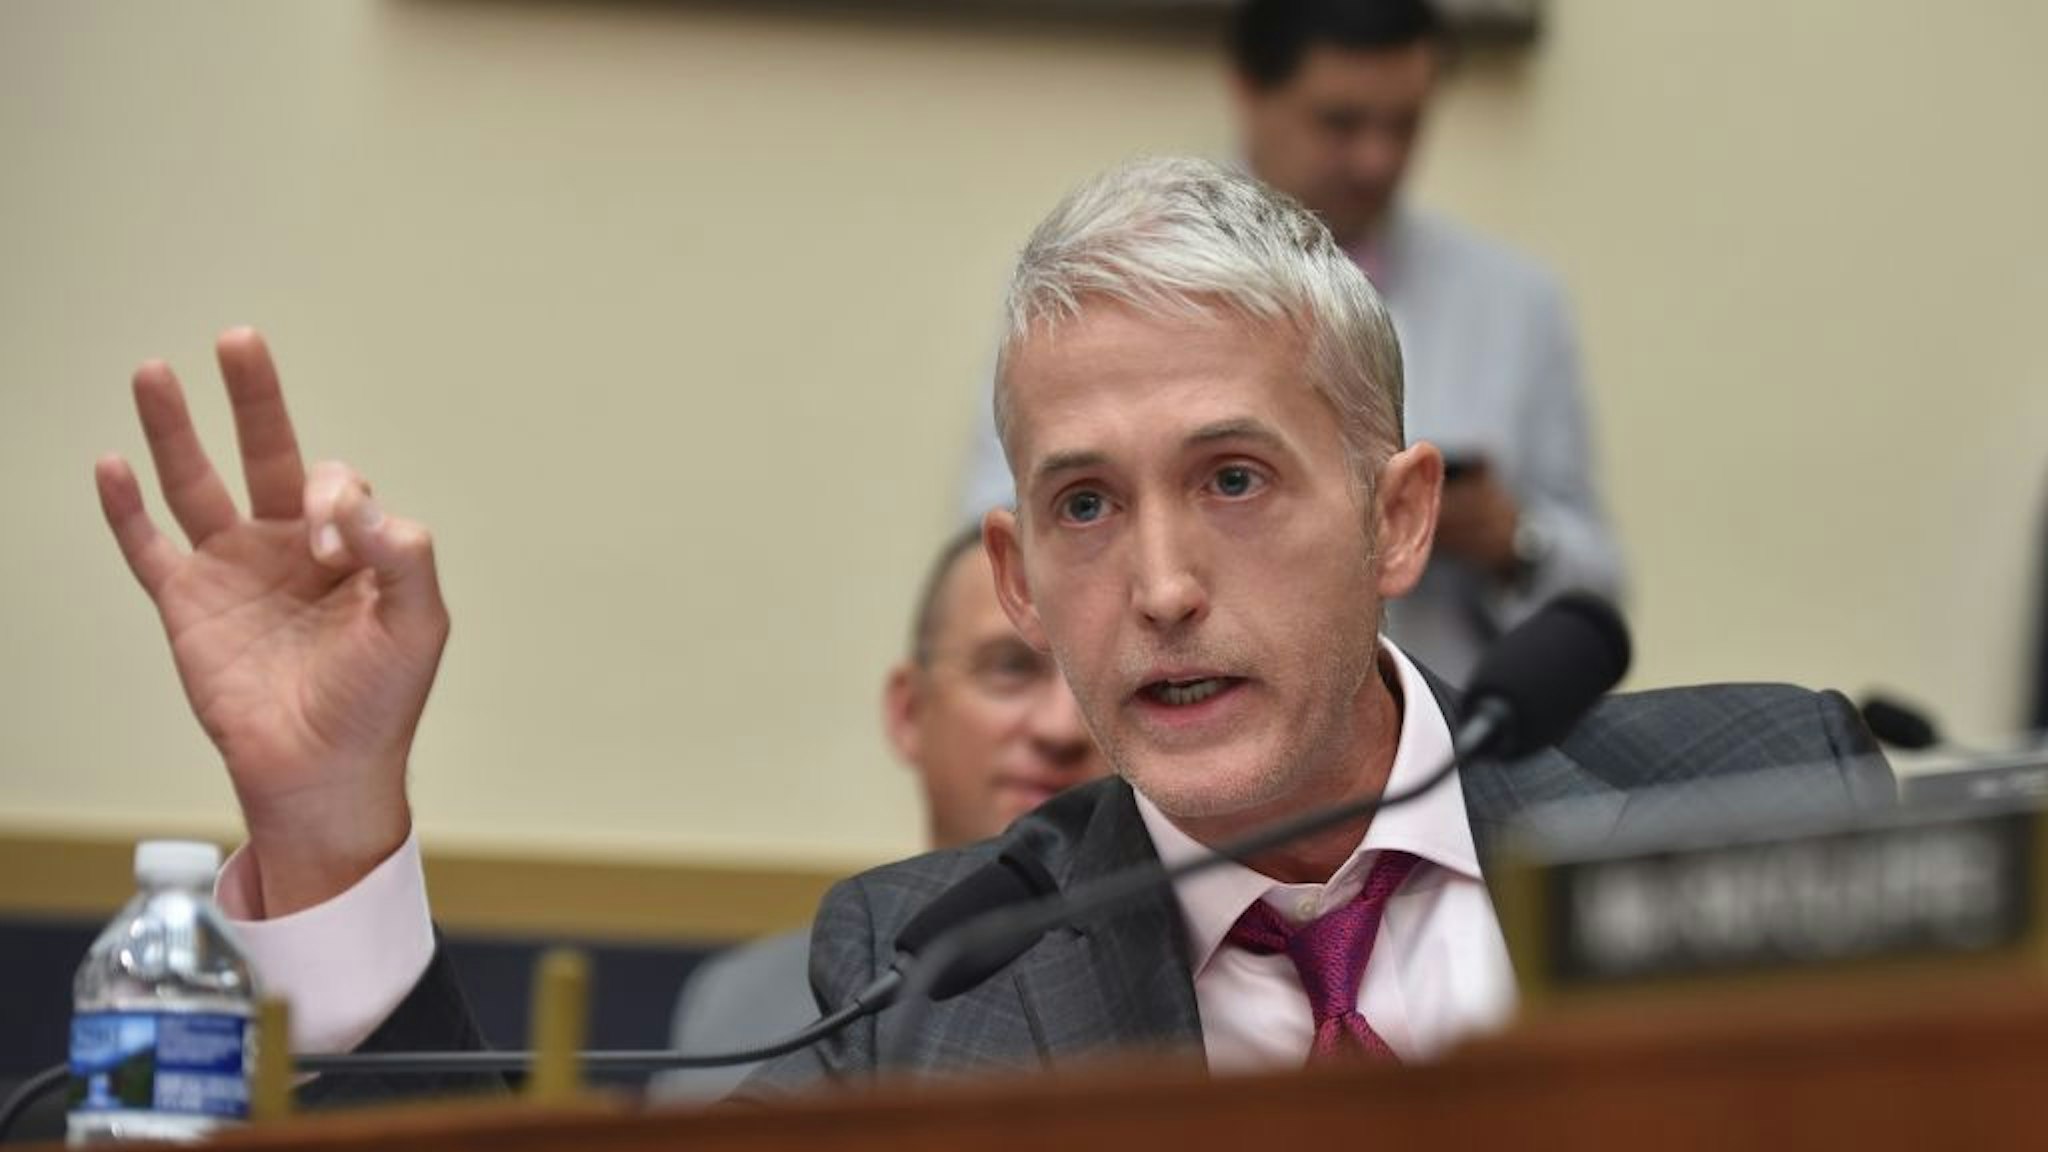 US Representative for South Carolina, Trey Gowdy, asks a question during a congressional House Judiciary Committee hearing on "Oversight of FBI and DOJ Actions Surrounding the 2016 Election," in Washington, DC, on June 28 2018.